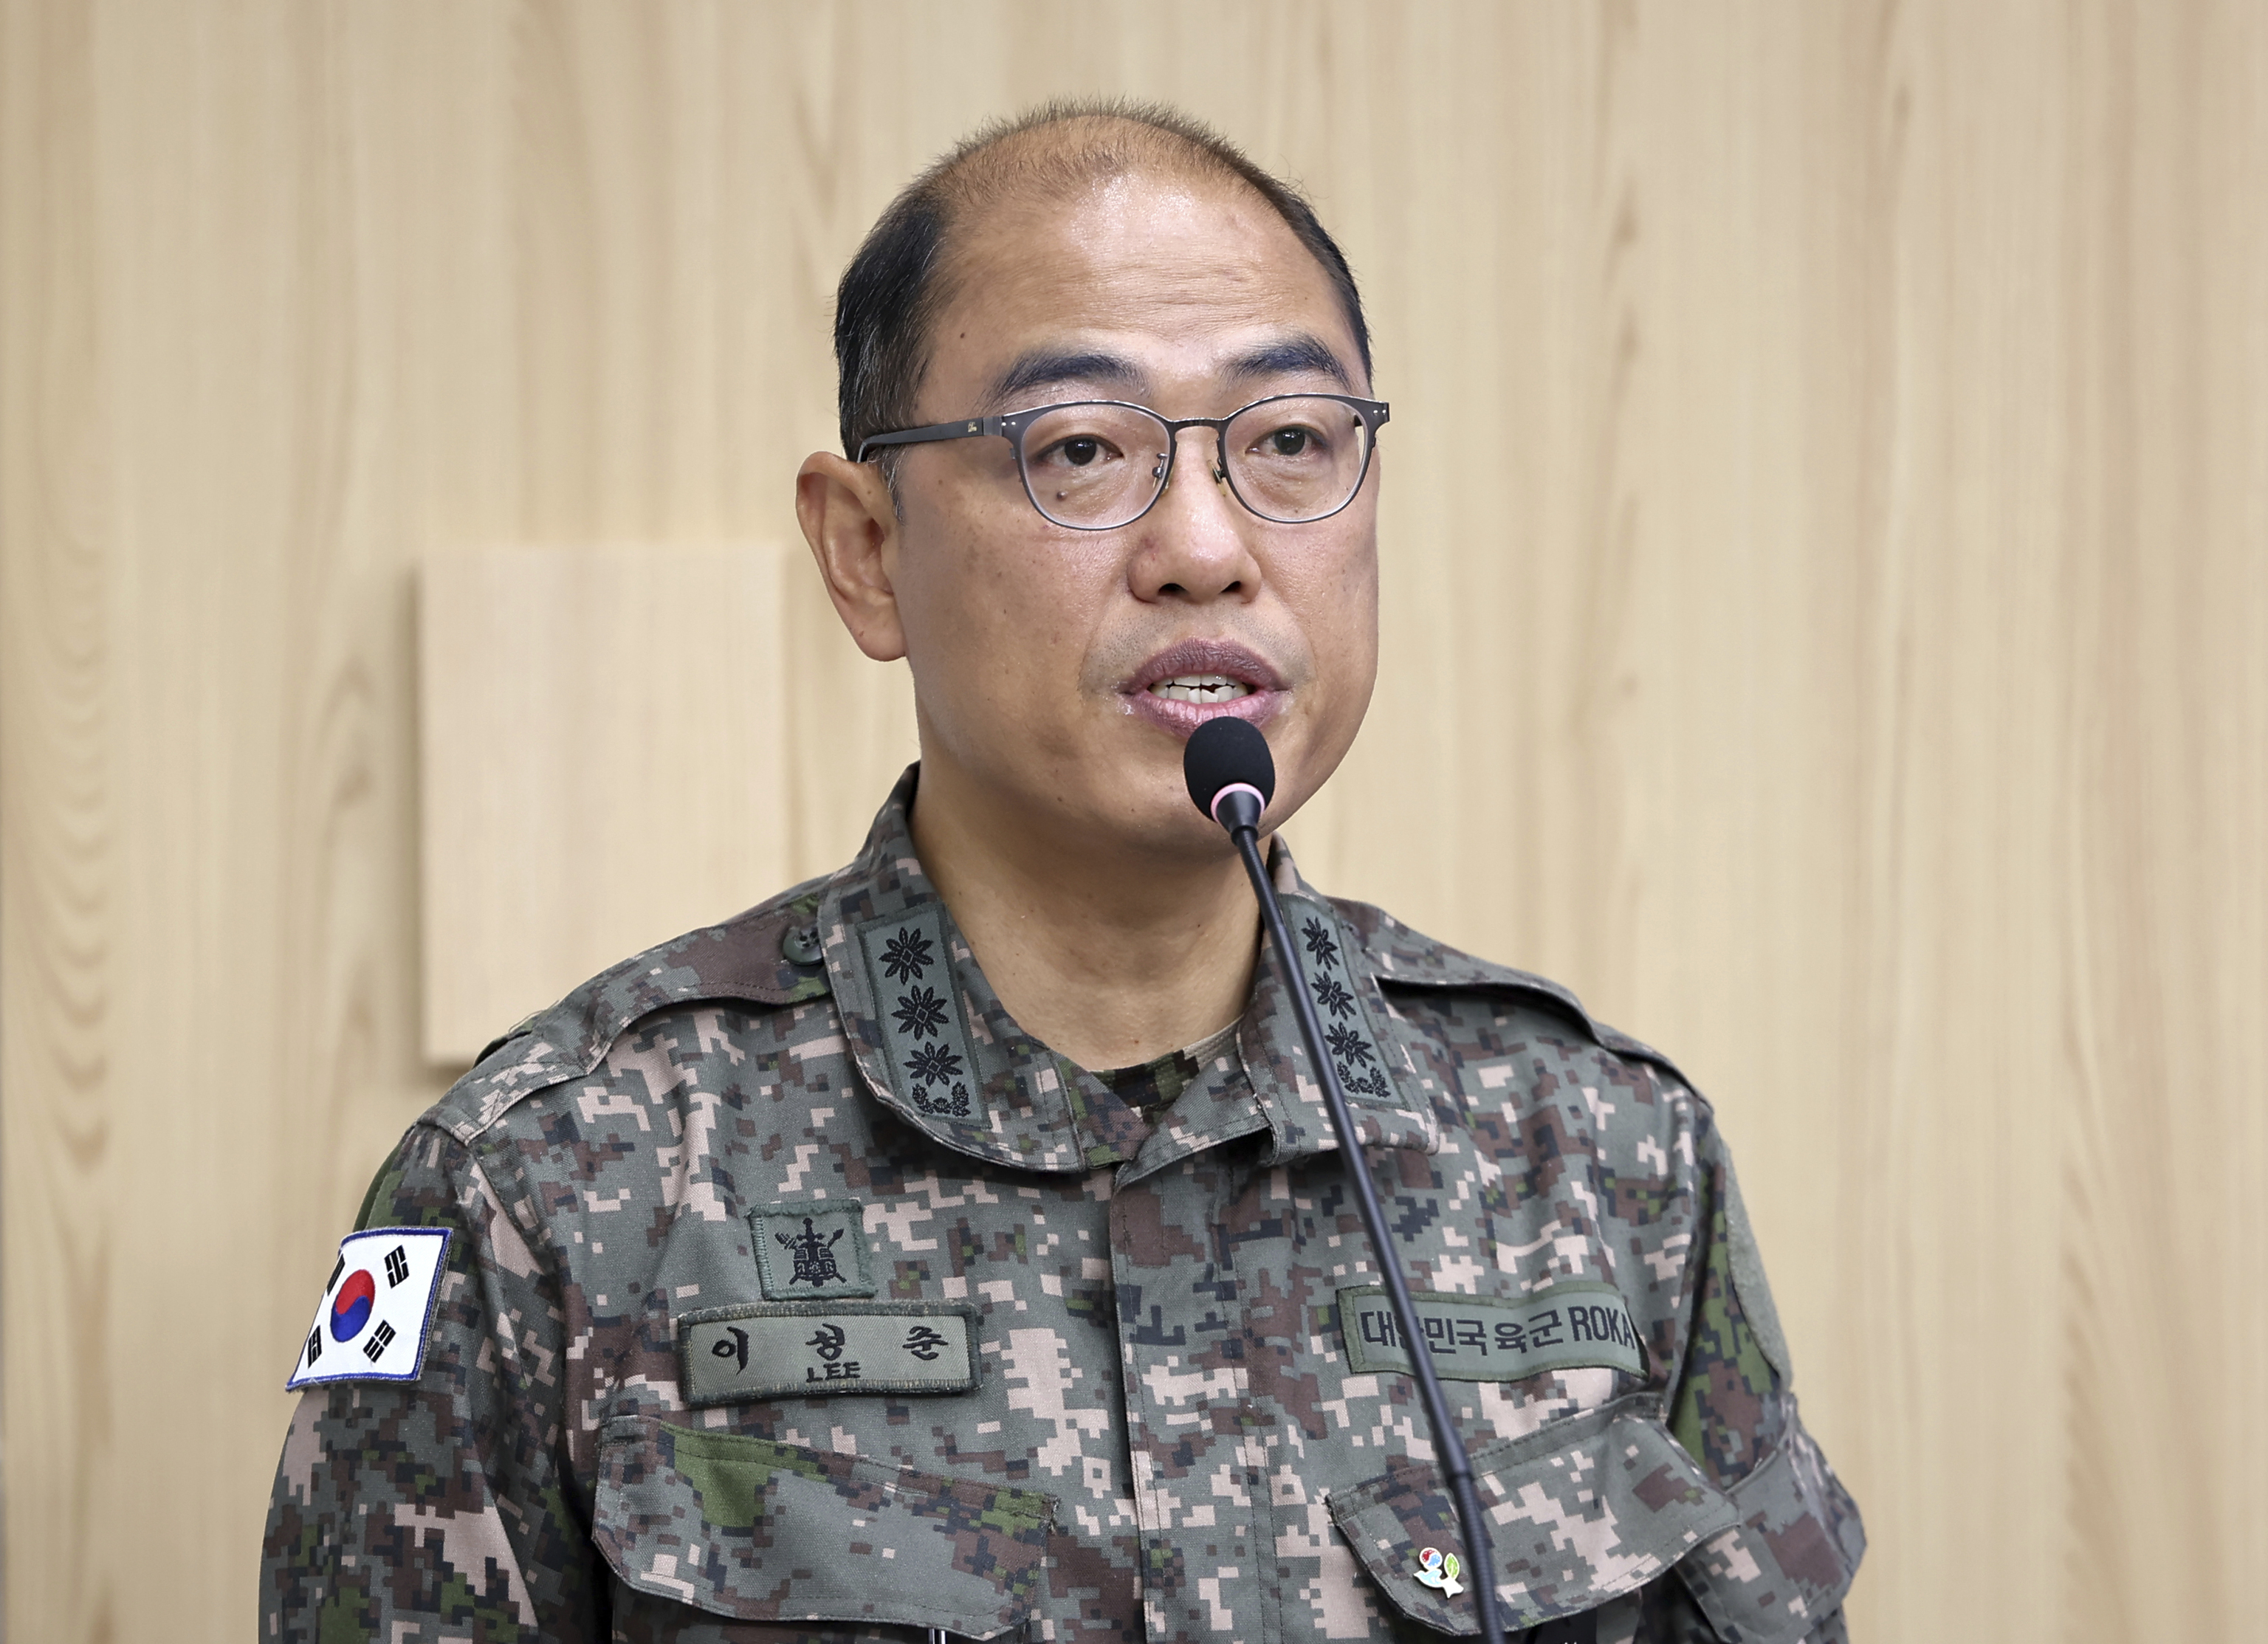 Lee Sung Joon, spokesperson of South Korea's Joint Chiefs of Staff, speaks during the briefing in Seoul, South Korea,